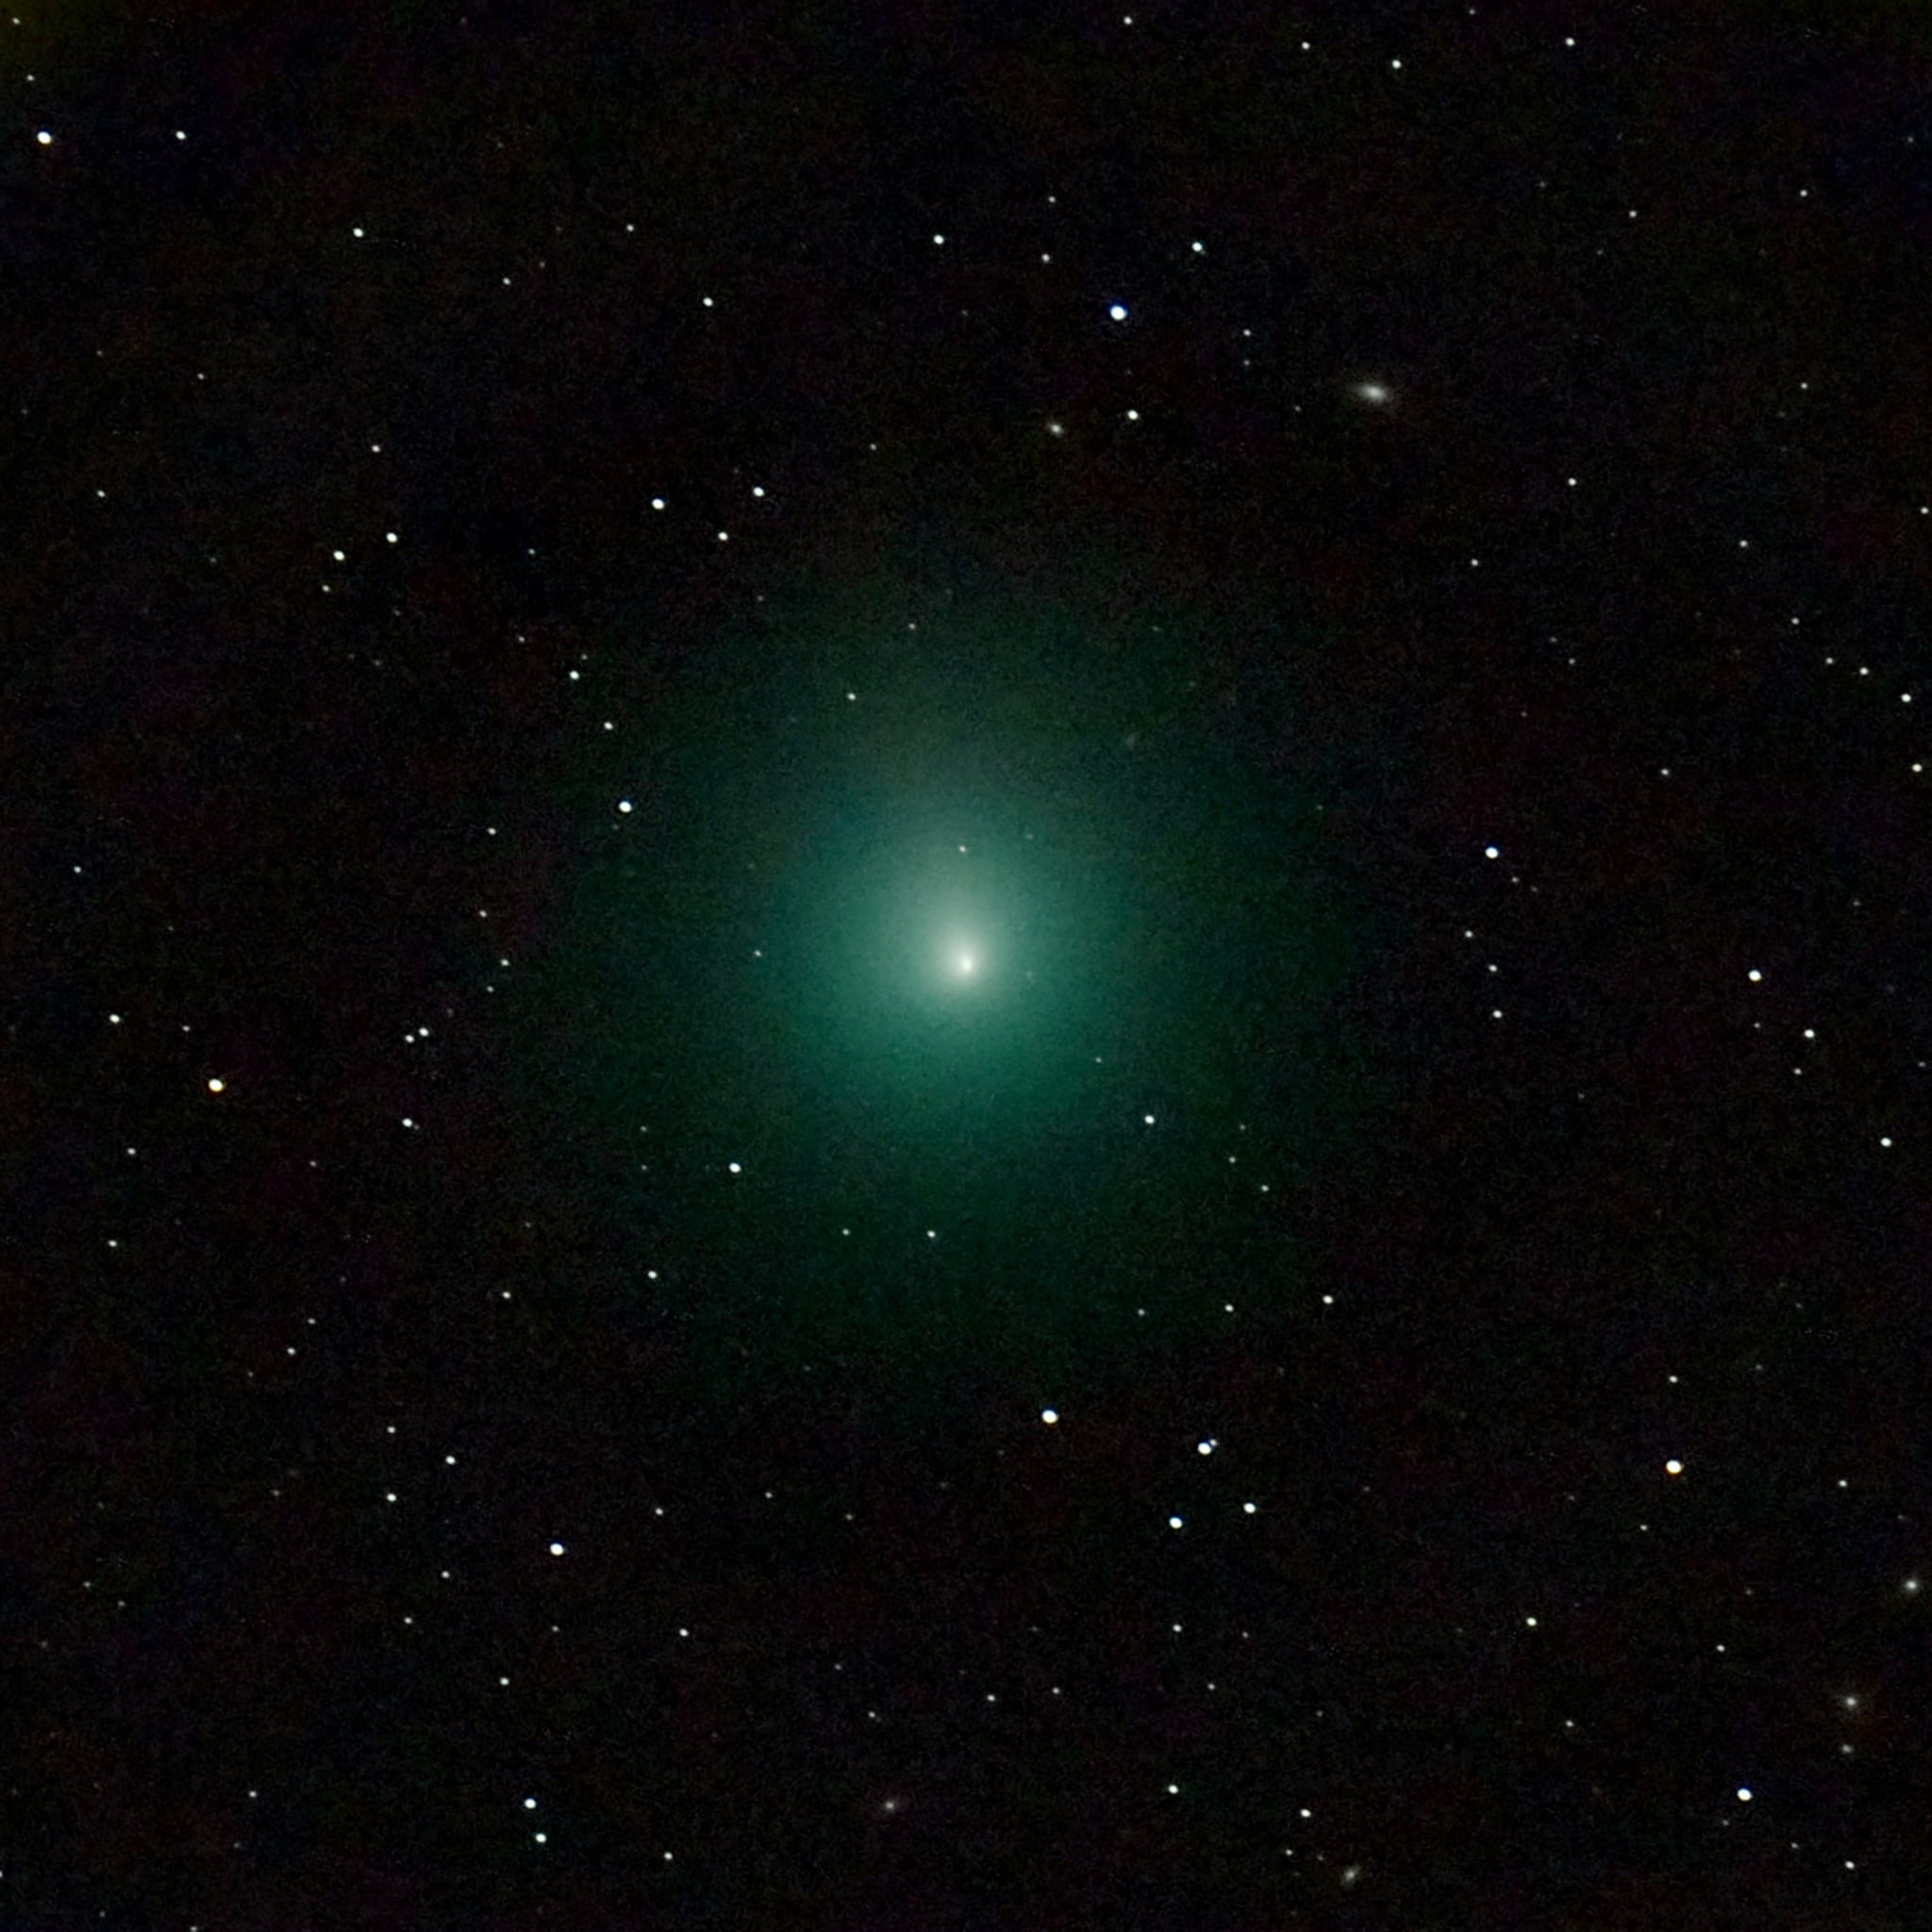 This picture taken from Paris region with a telescope on December 3, 2018 shows the 46P/Wirtanen comet as it will come closer to Earth on December 16, 2018. - The comet will be closer and visible from Earth if weather allows until December 22, 2018. (Photo by Nicolas Biver / LESIA/Observatoire de Paris-PSL / AFP)        (Photo credit should read NICOLAS BIVER/AFP/Getty Images)